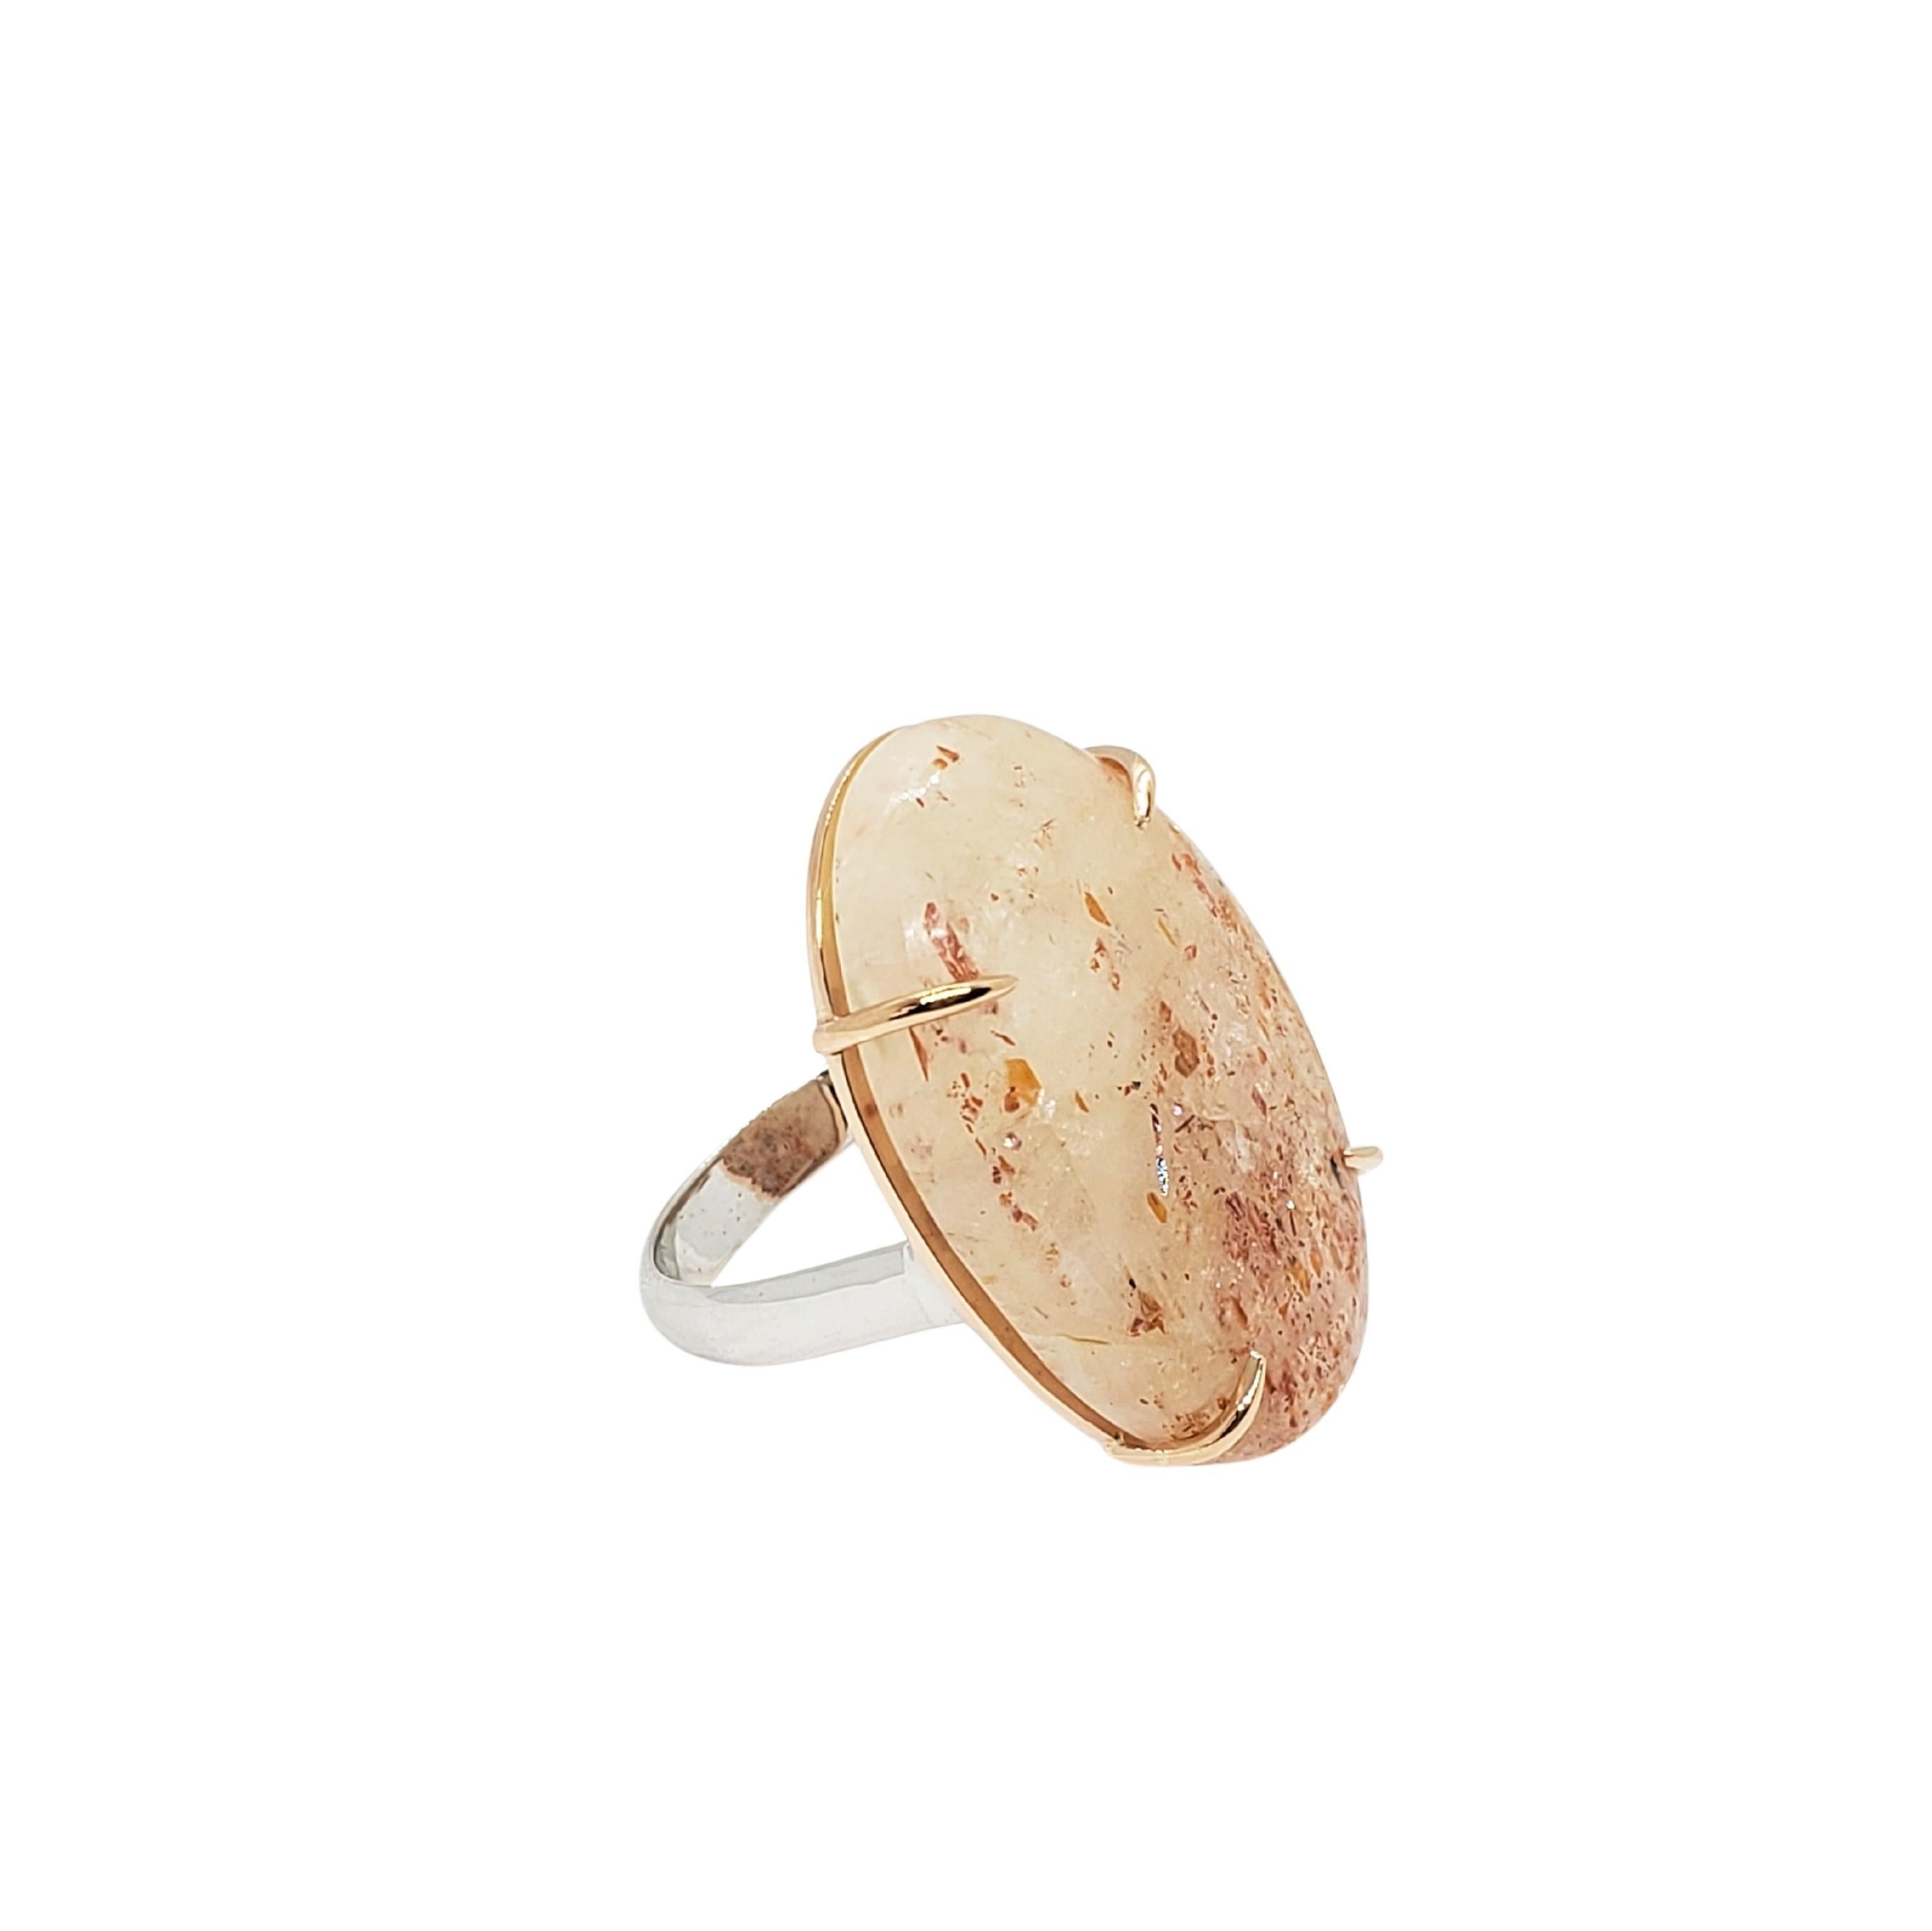 Merging Pink Gold, White Gold and a beautiful Sunstone Oval cabochon gemstone with optical shimmering results in a mouth dropping style. The band in polished 14K white gold is assembled to a polished 14K pink Gold custom setting with an open back